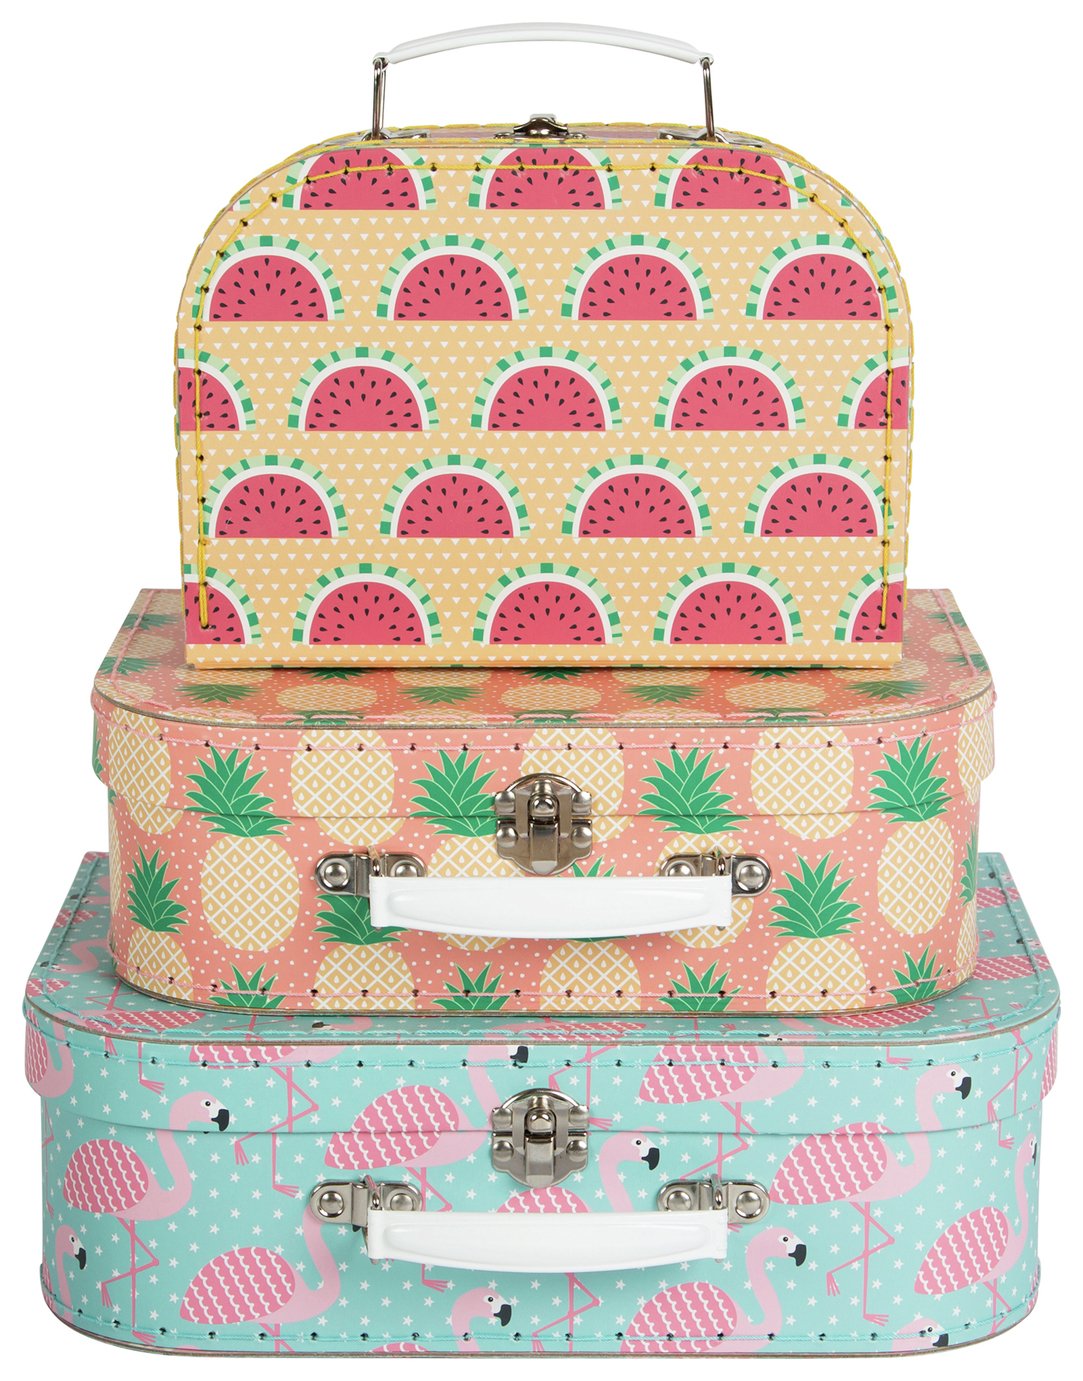 sass & belle Tropical Suitcases review